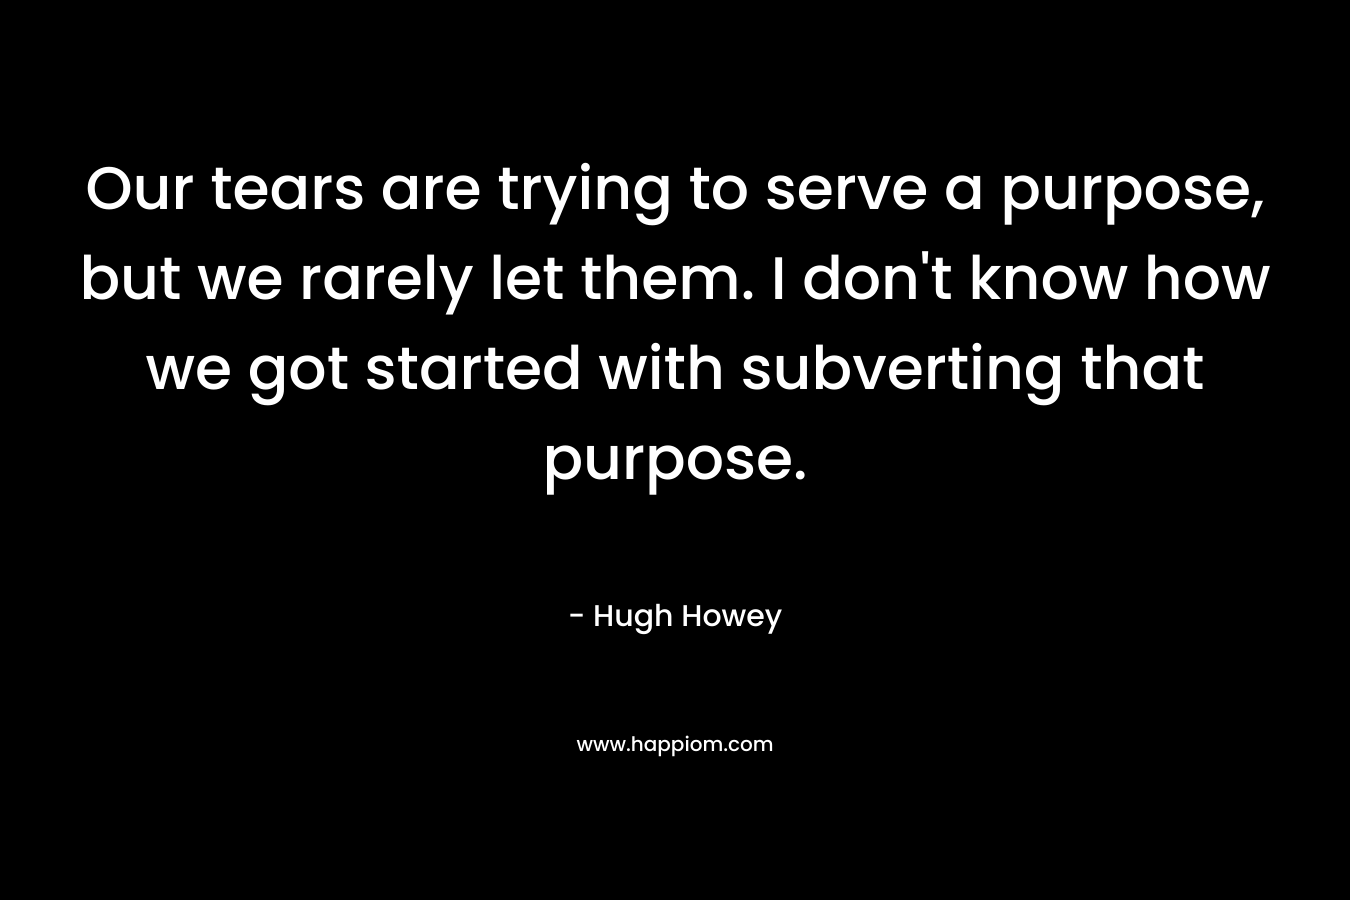 Our tears are trying to serve a purpose, but we rarely let them. I don't know how we got started with subverting that purpose.